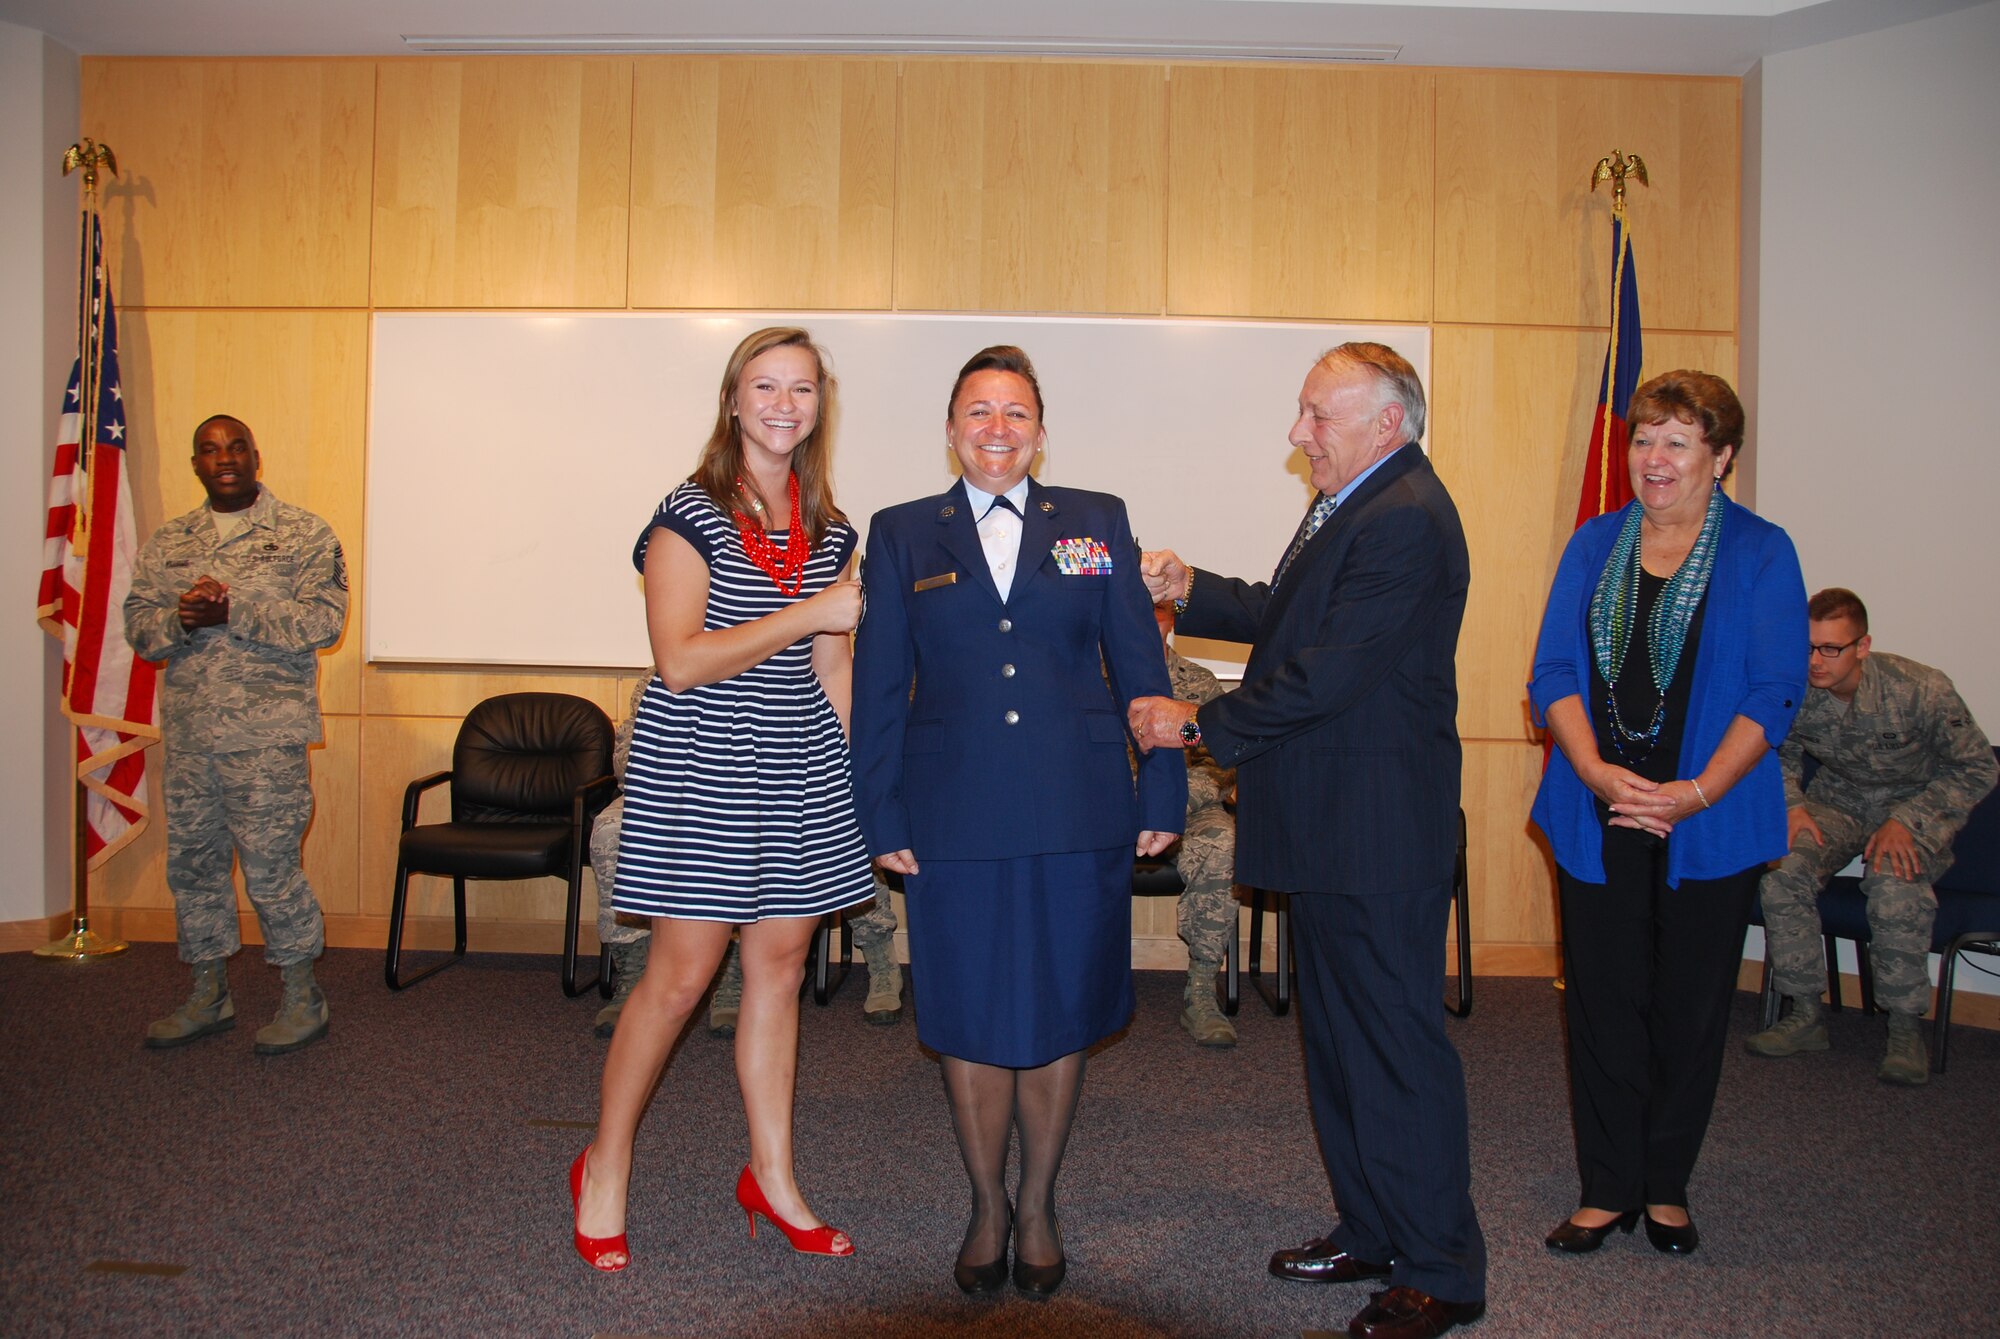 U.S. Air National Guard Chief Master Sgt. Angela Zephier, superintendent of the 156th Weather Flight, gets the rank of Chief tacked on by daughter Sarah, and father, retired Chief Warrant Officer (4) Larry Deal, as her mother Pamela, proudly watches her daughter during her promotion ceremony held at the 145th Combat Operations Group, New London, N.C. October 4, 2014. (U.S. Air National Guard photo by Master Sgt. Matthew Ciampa, 145th Weather Flight/Released)